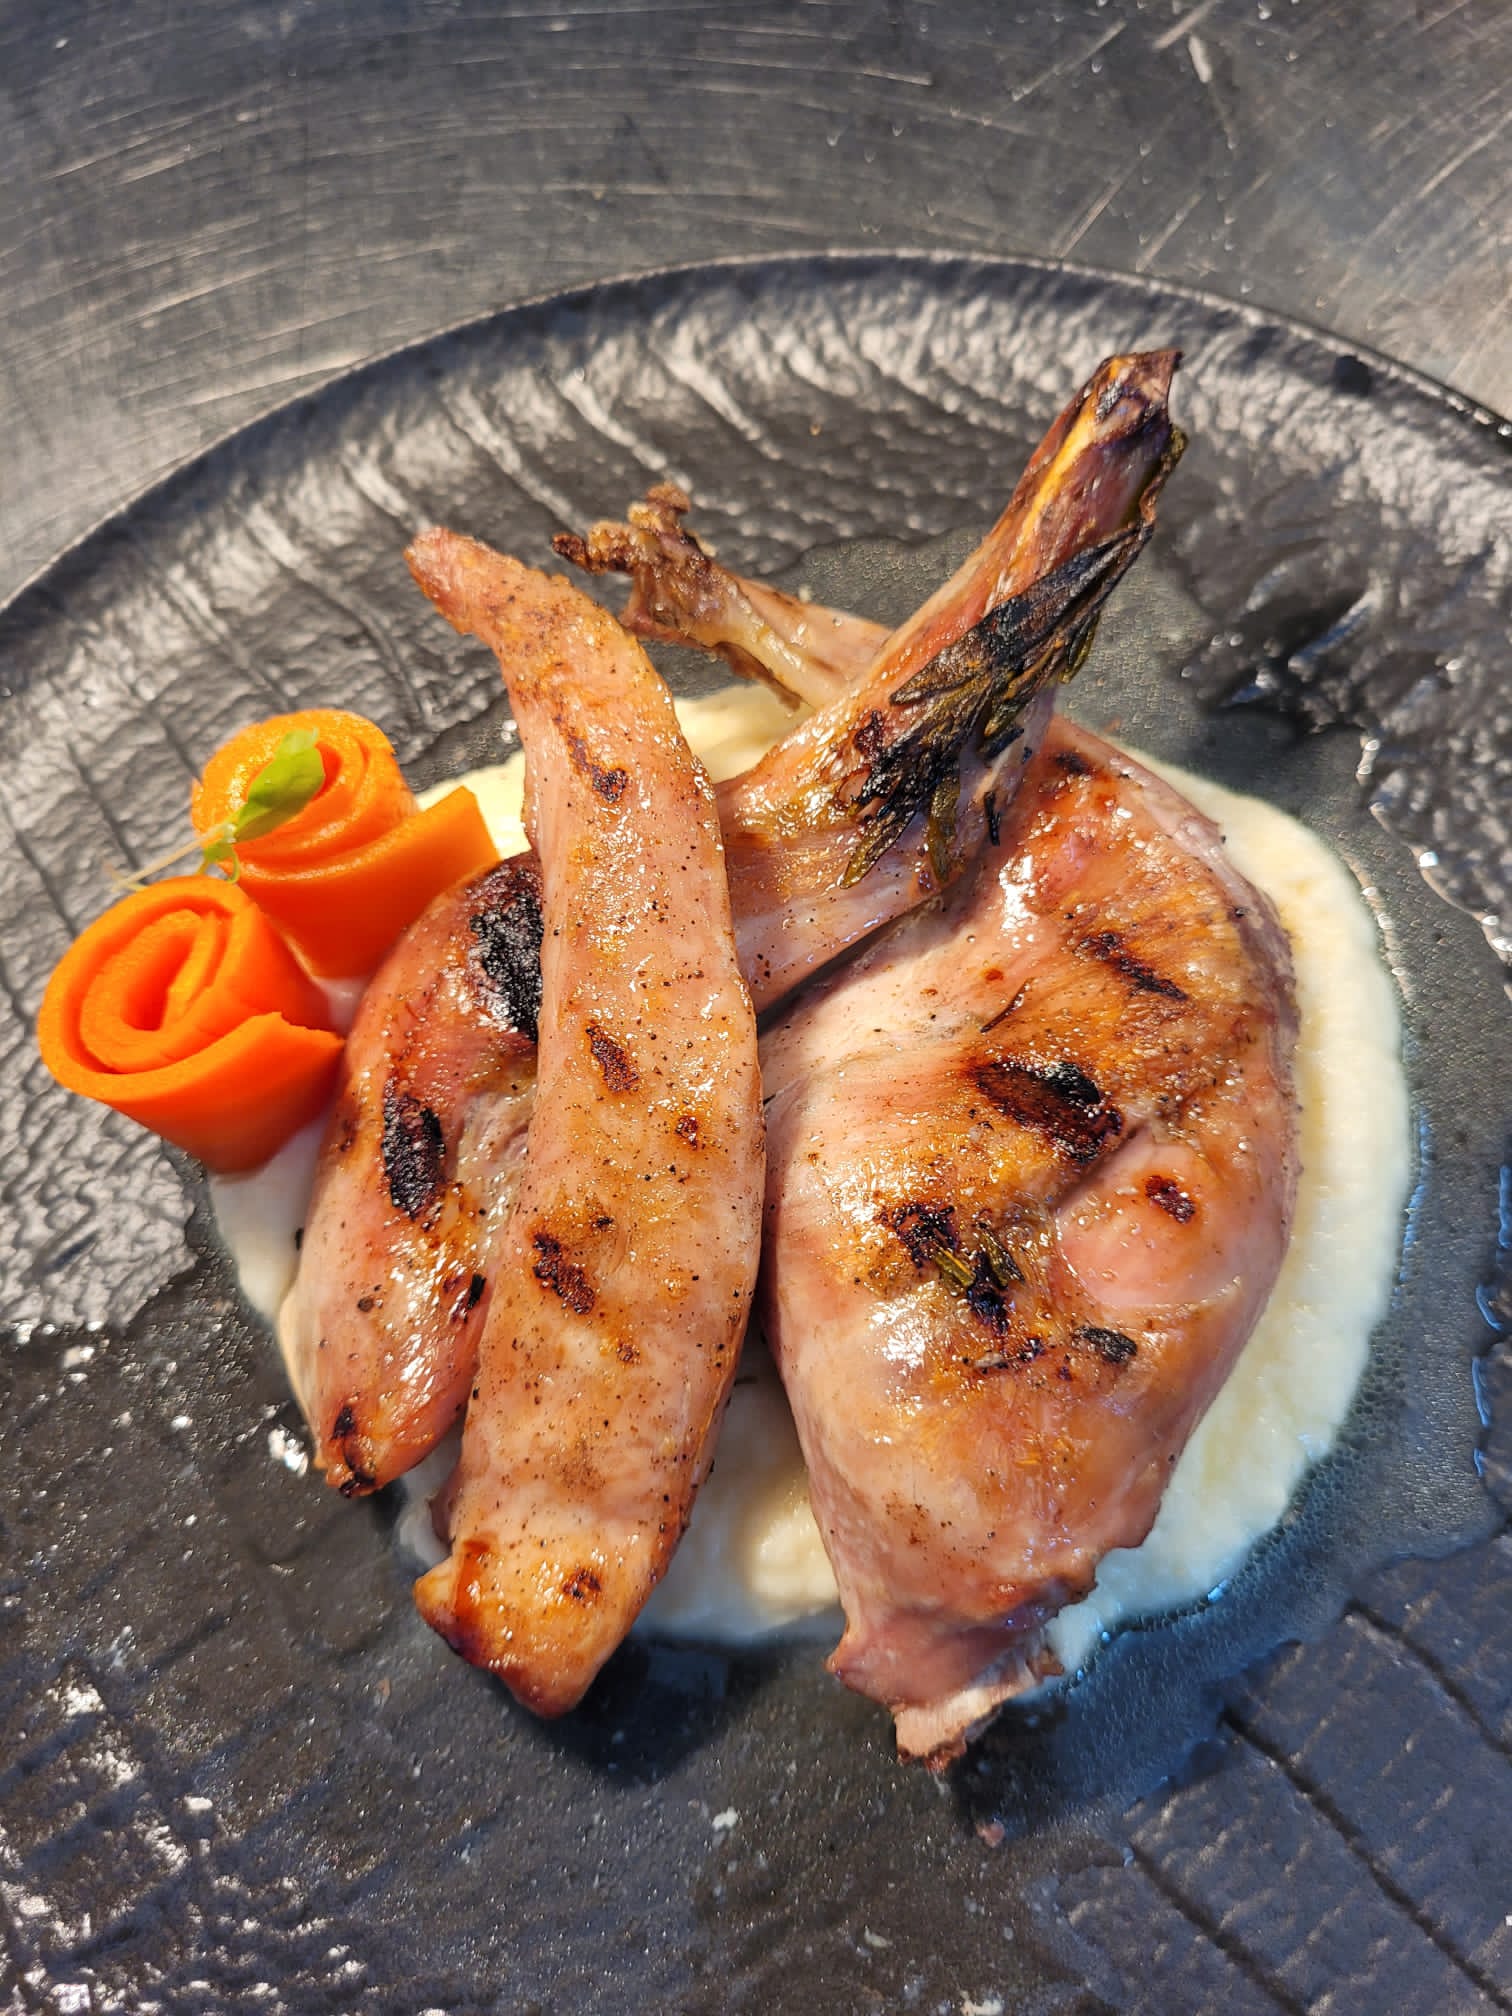 Grilled sous vide rabbit with puree